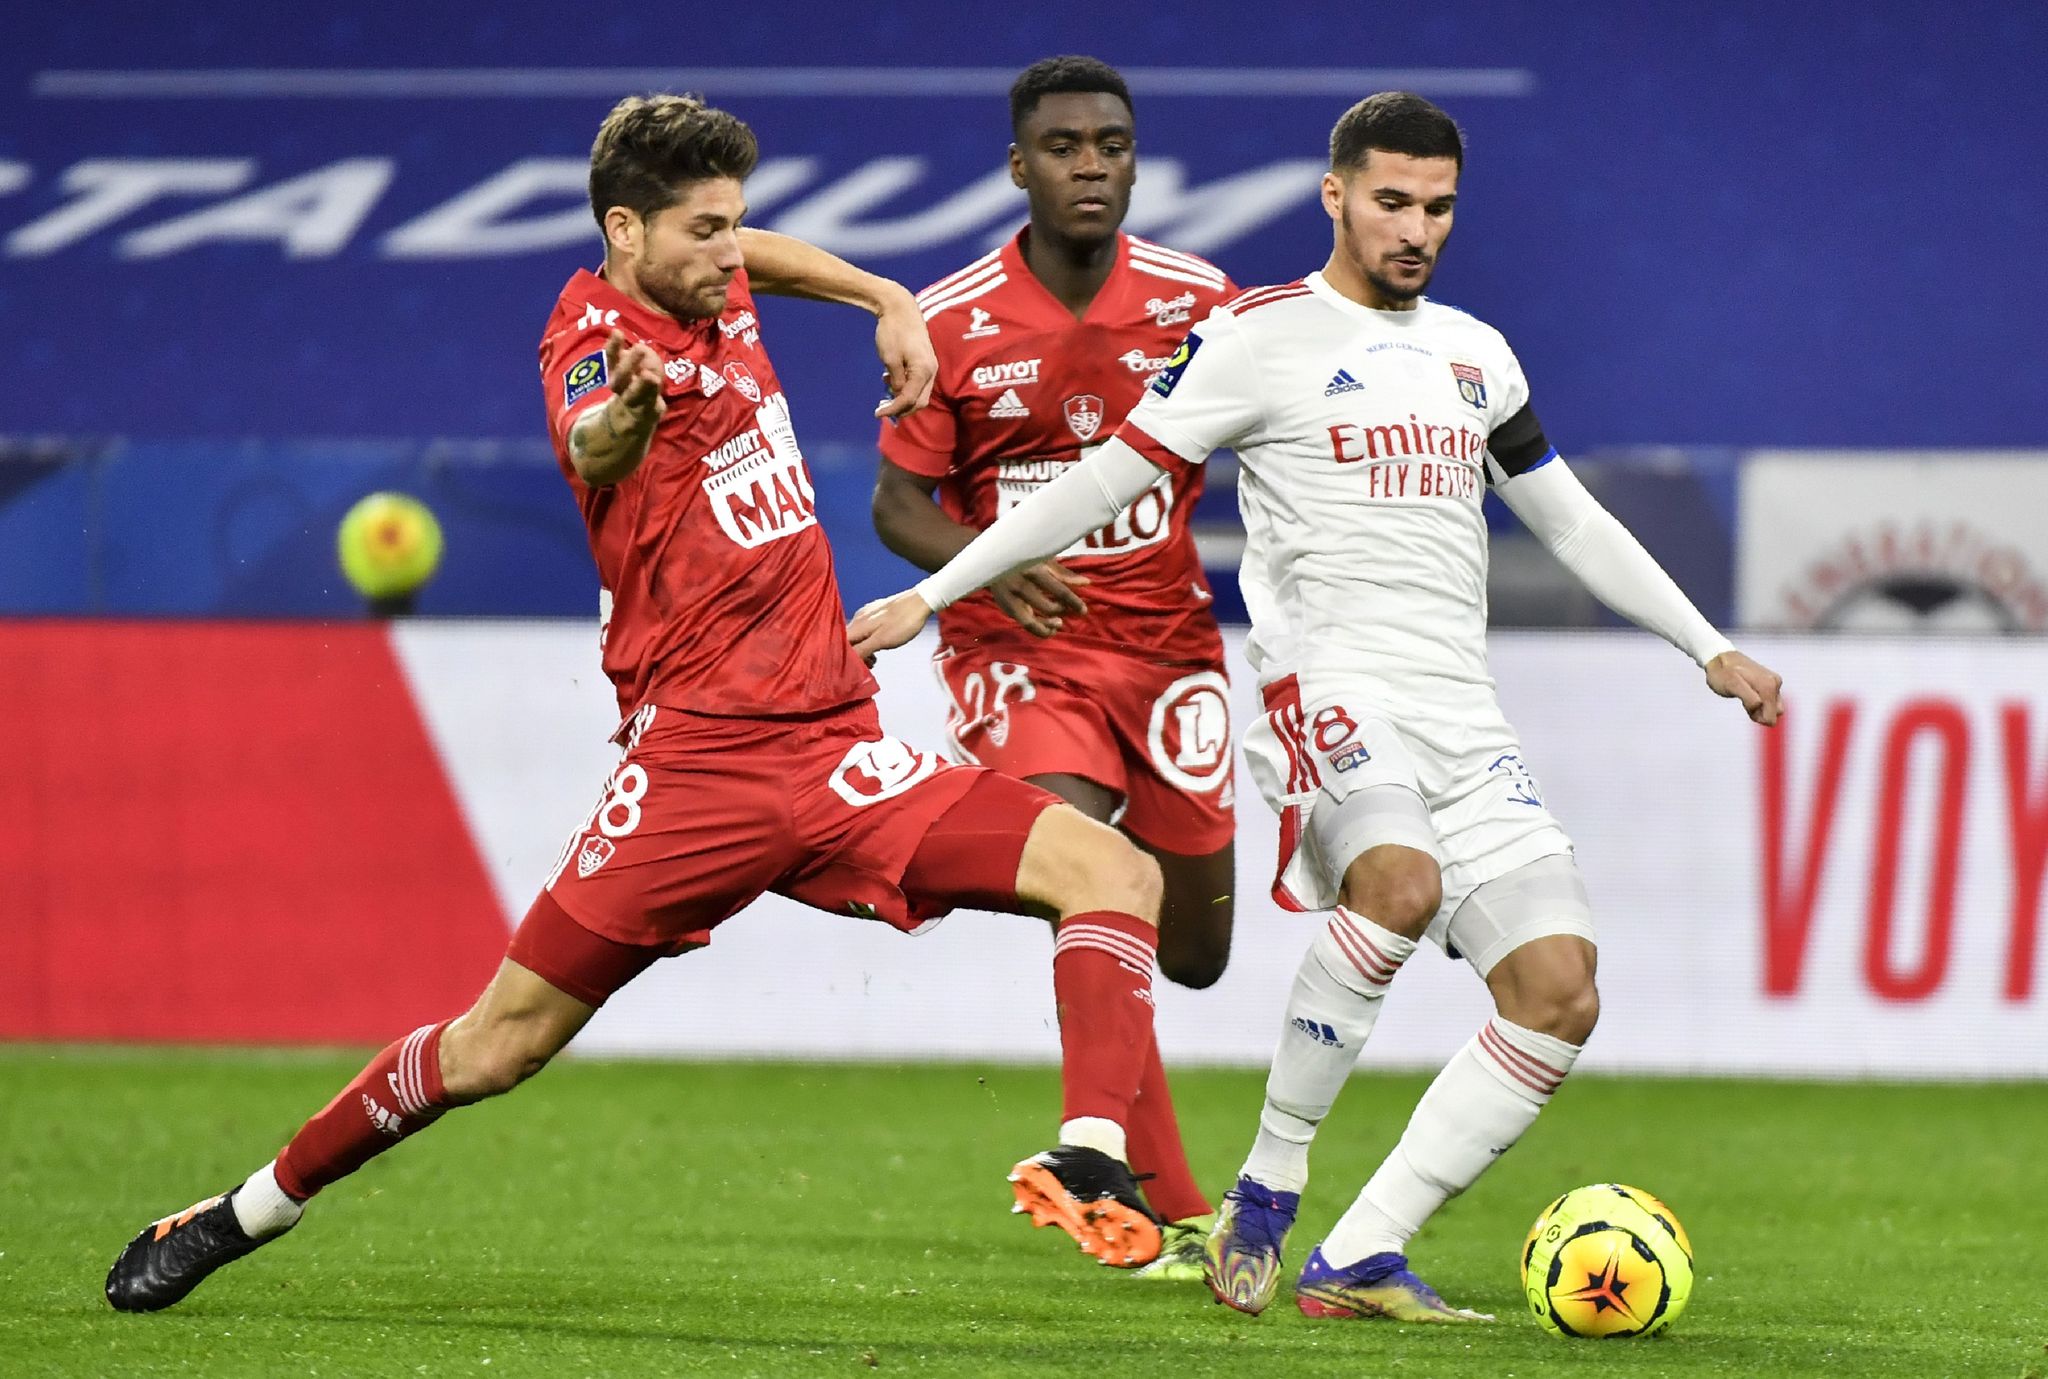 lt;HIT gt;Lyon lt;/HIT gt;'s French midfielder Houssem lt;HIT gt;Aouar lt;/HIT gt; (R) fights for the ball with Brest's French midfielder Paul Lasne (L) during the French L1 football match between Olympique Lyonnais and Le Stade Brestois 29 at the Groupama stadium in Decines-Charpieu, near lt;HIT gt;Lyon lt;/HIT gt;, south-eastern France, on December 16, 2020. (Photo by PHILIPPE DESMAZES / AFP)